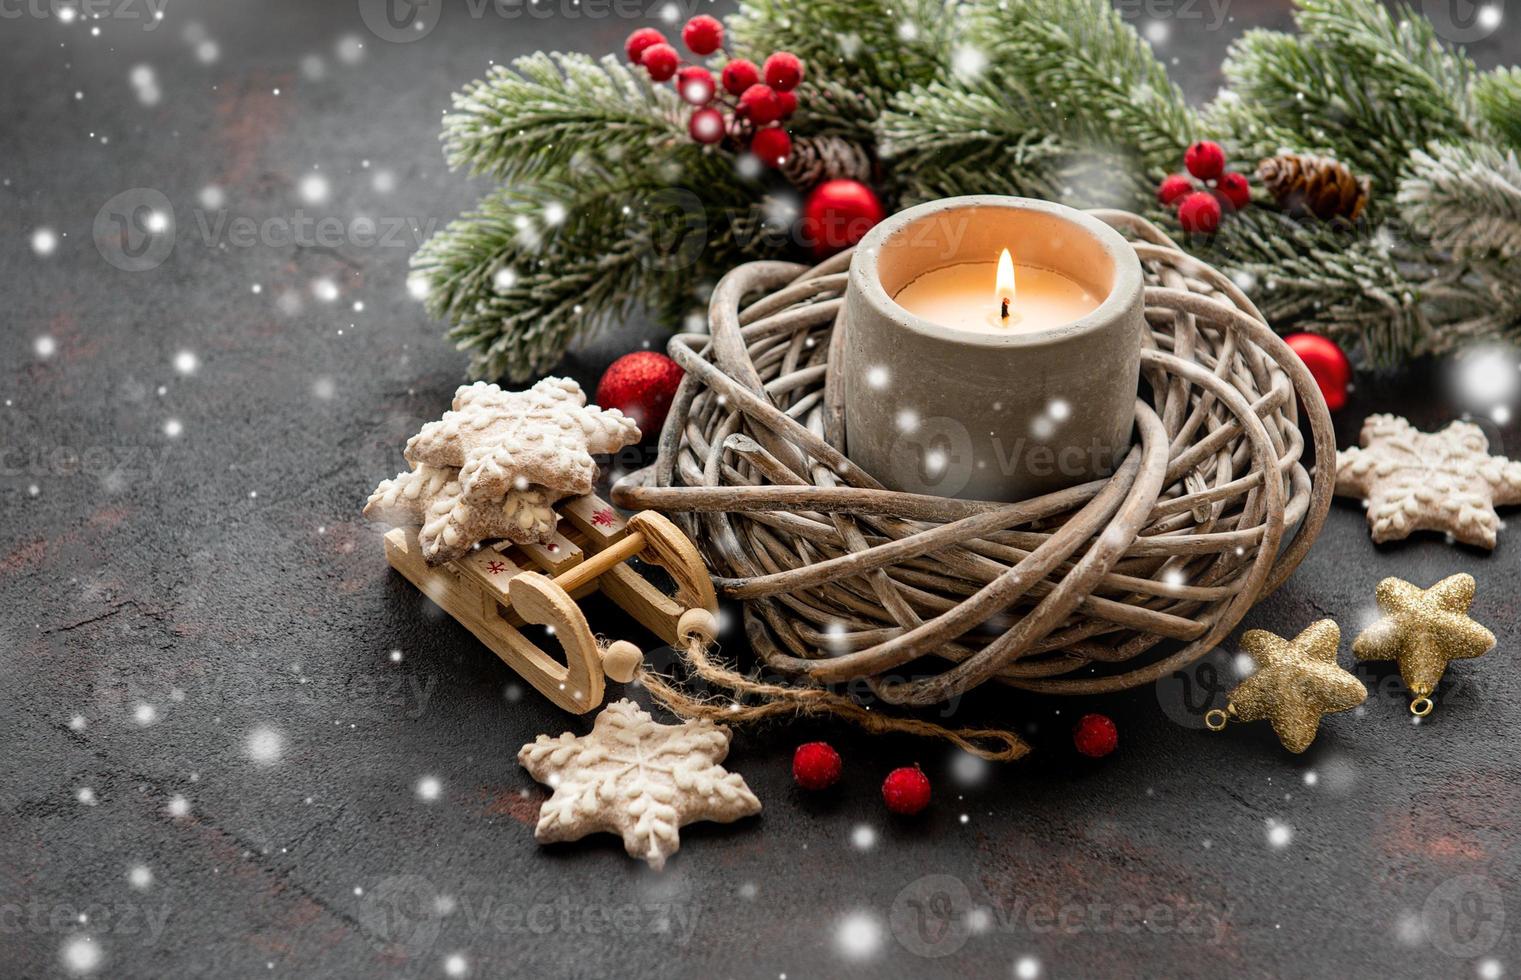 Candle and Christmas decorations photo